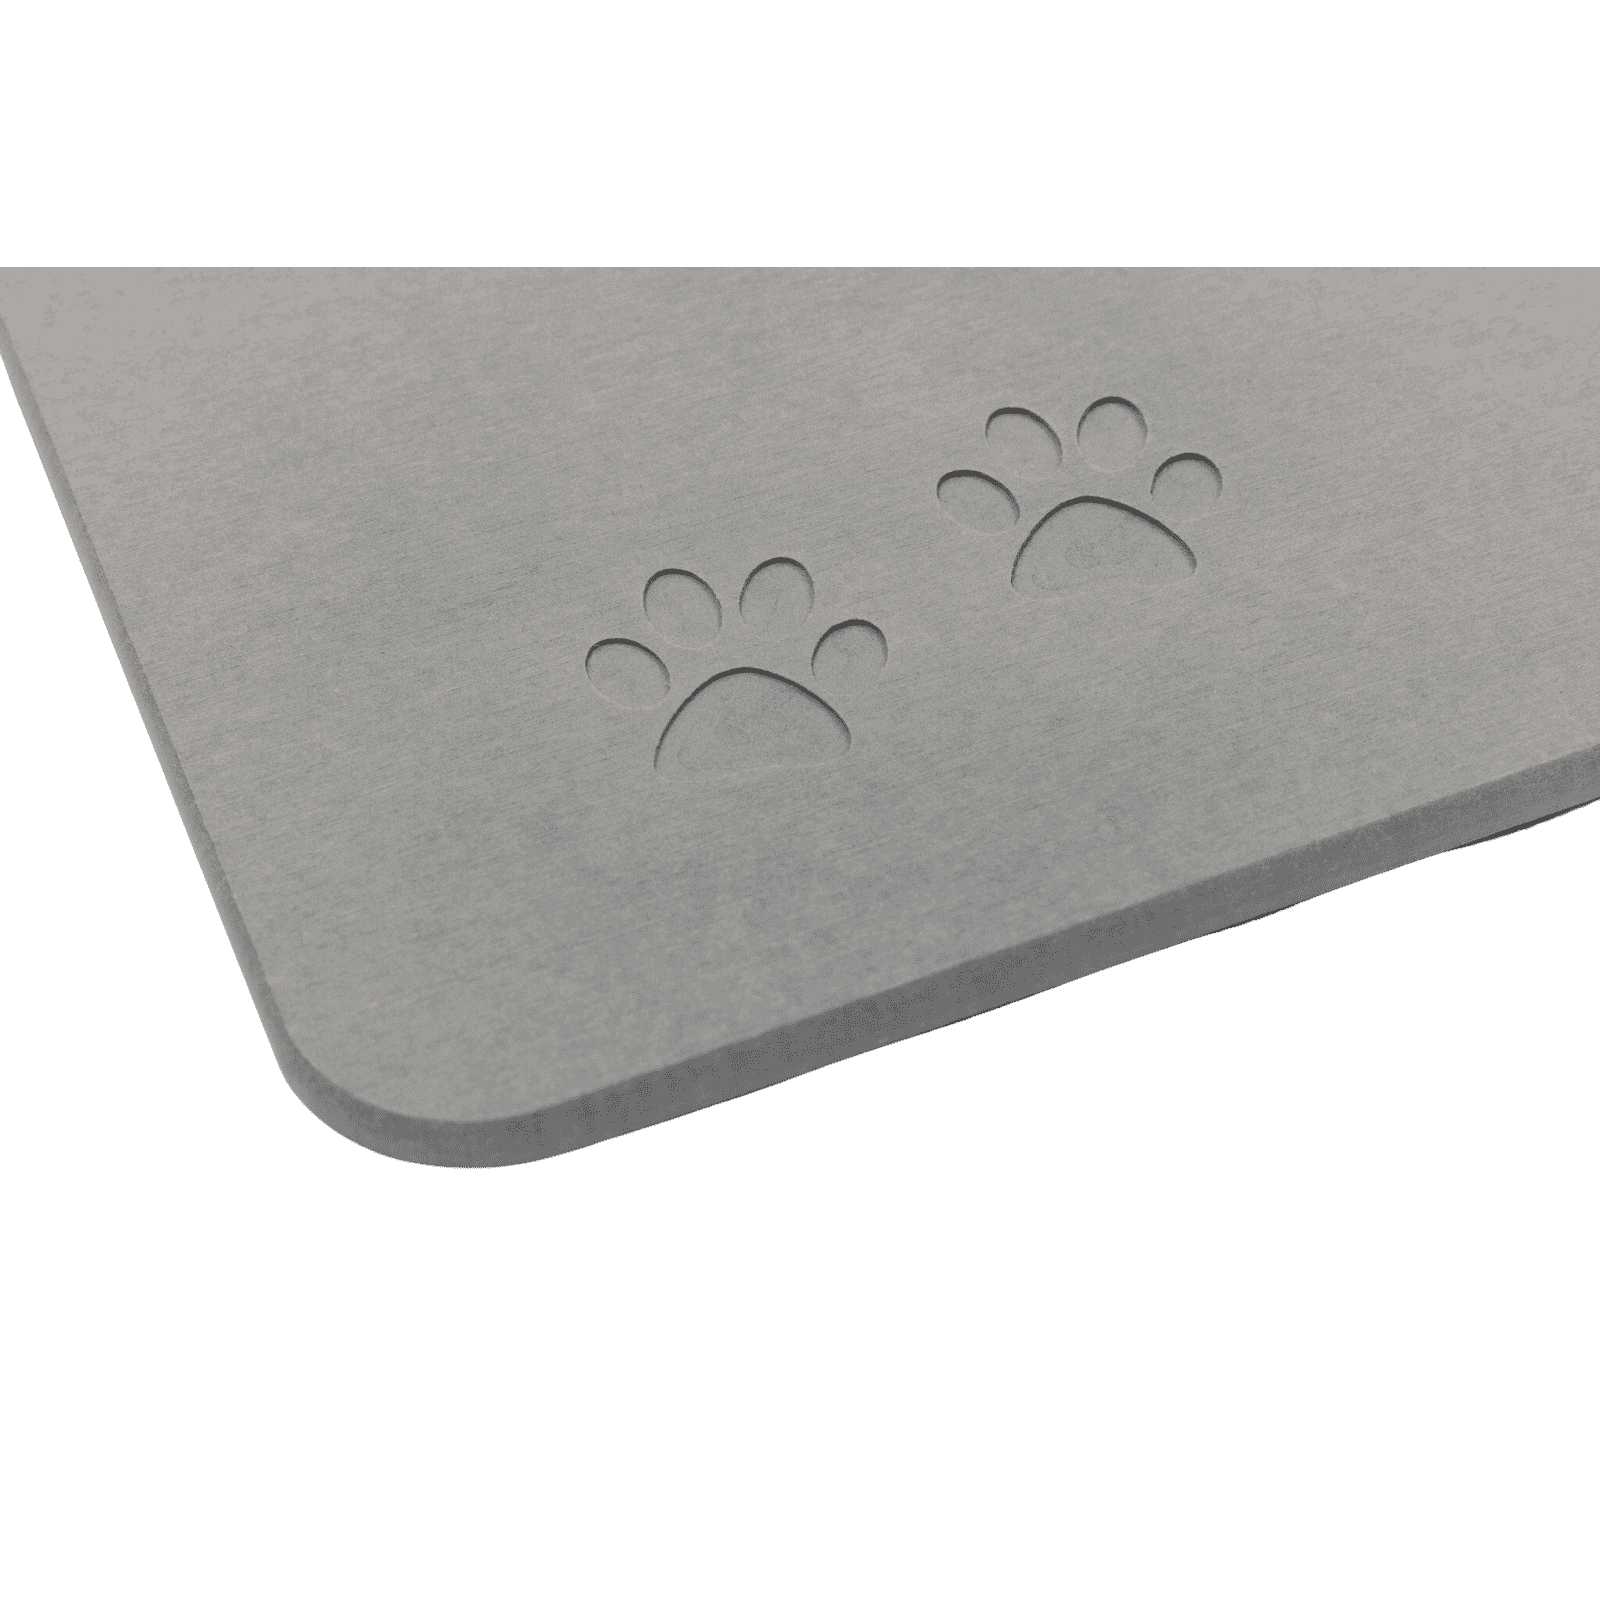 Pet Feeding Mat-Absorbent Dog Mat for Food and Water Bowl-No Stains Easy  Clean Dog Food Mat-Quick Dry Dog Water Dispenser Mat-Puppy Supplies Dog